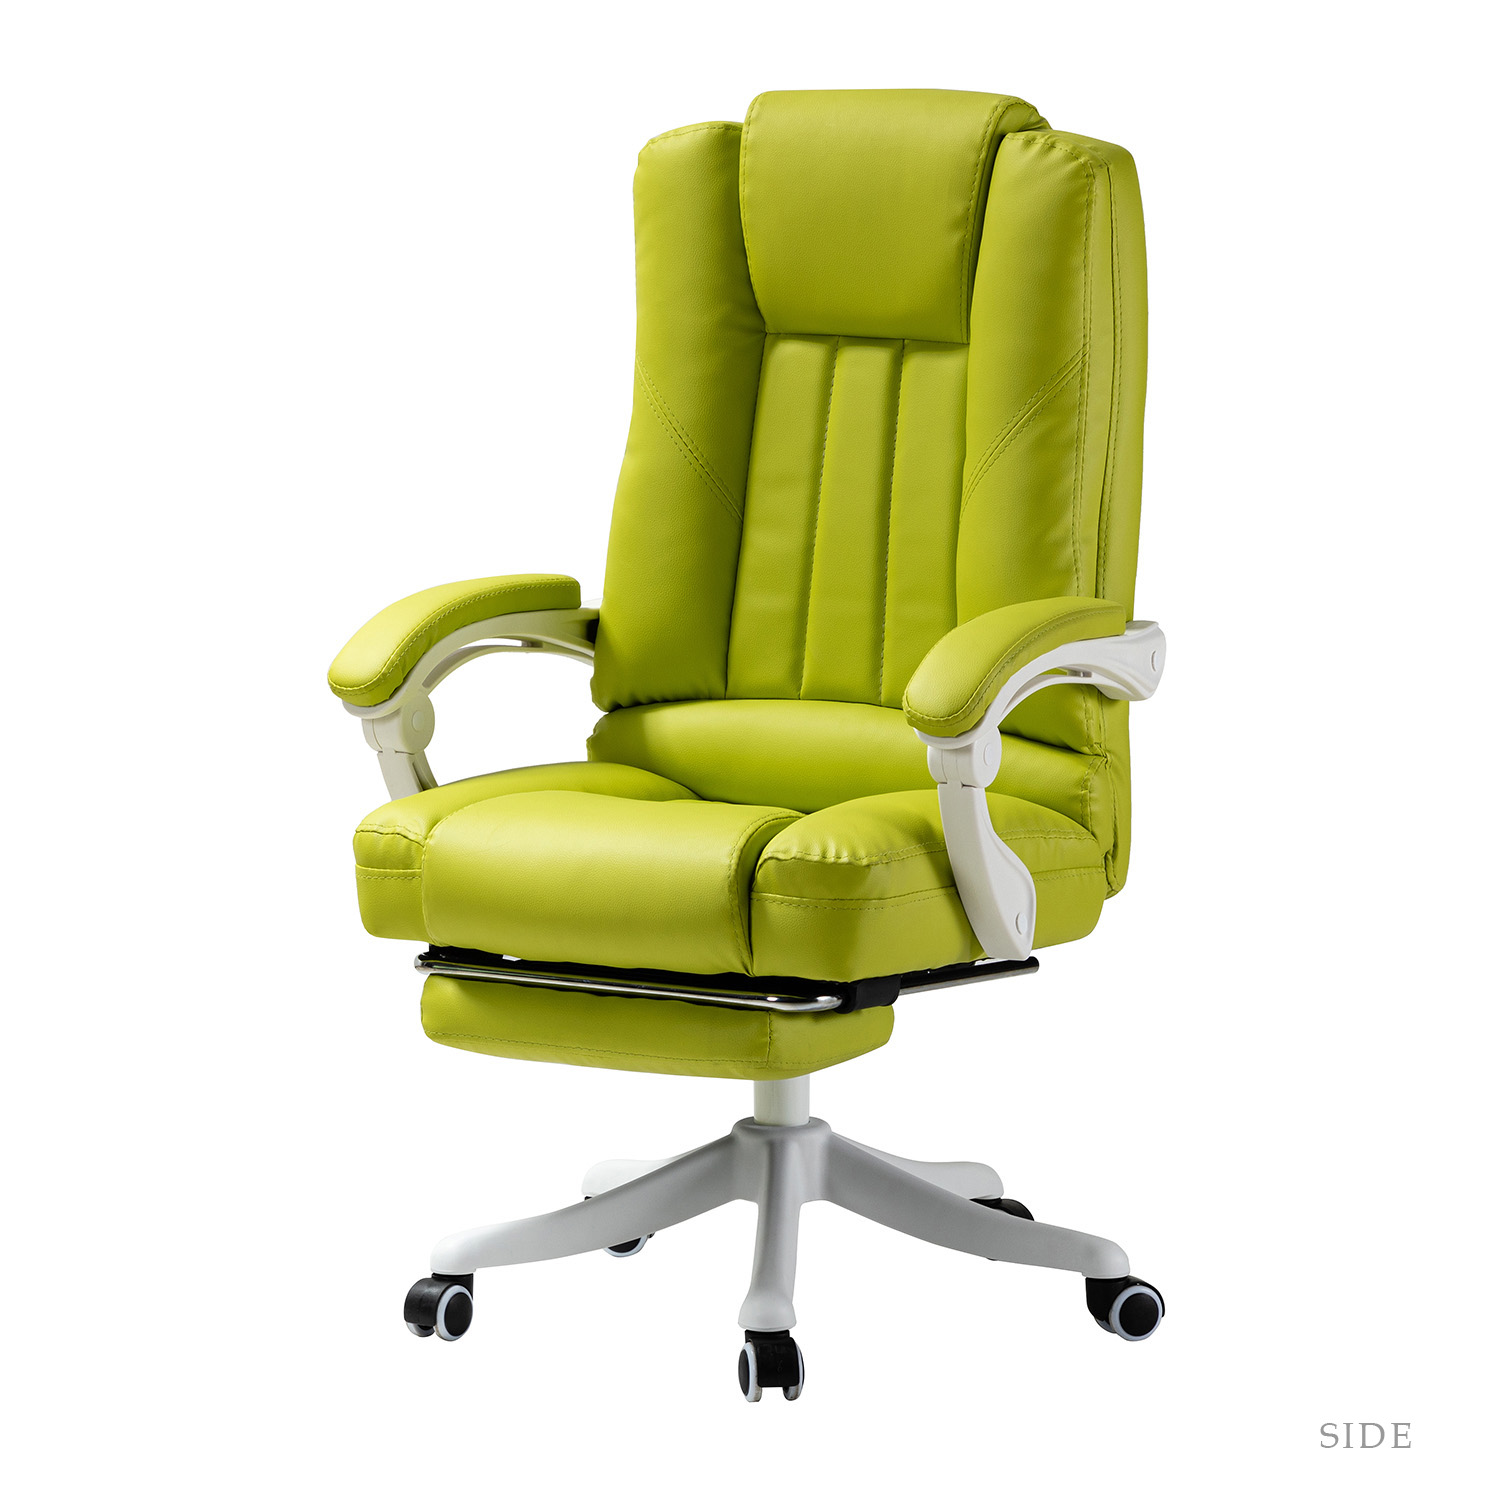 Flavia Swivel Gaming Chair with Adjustable Height-Boyel Living